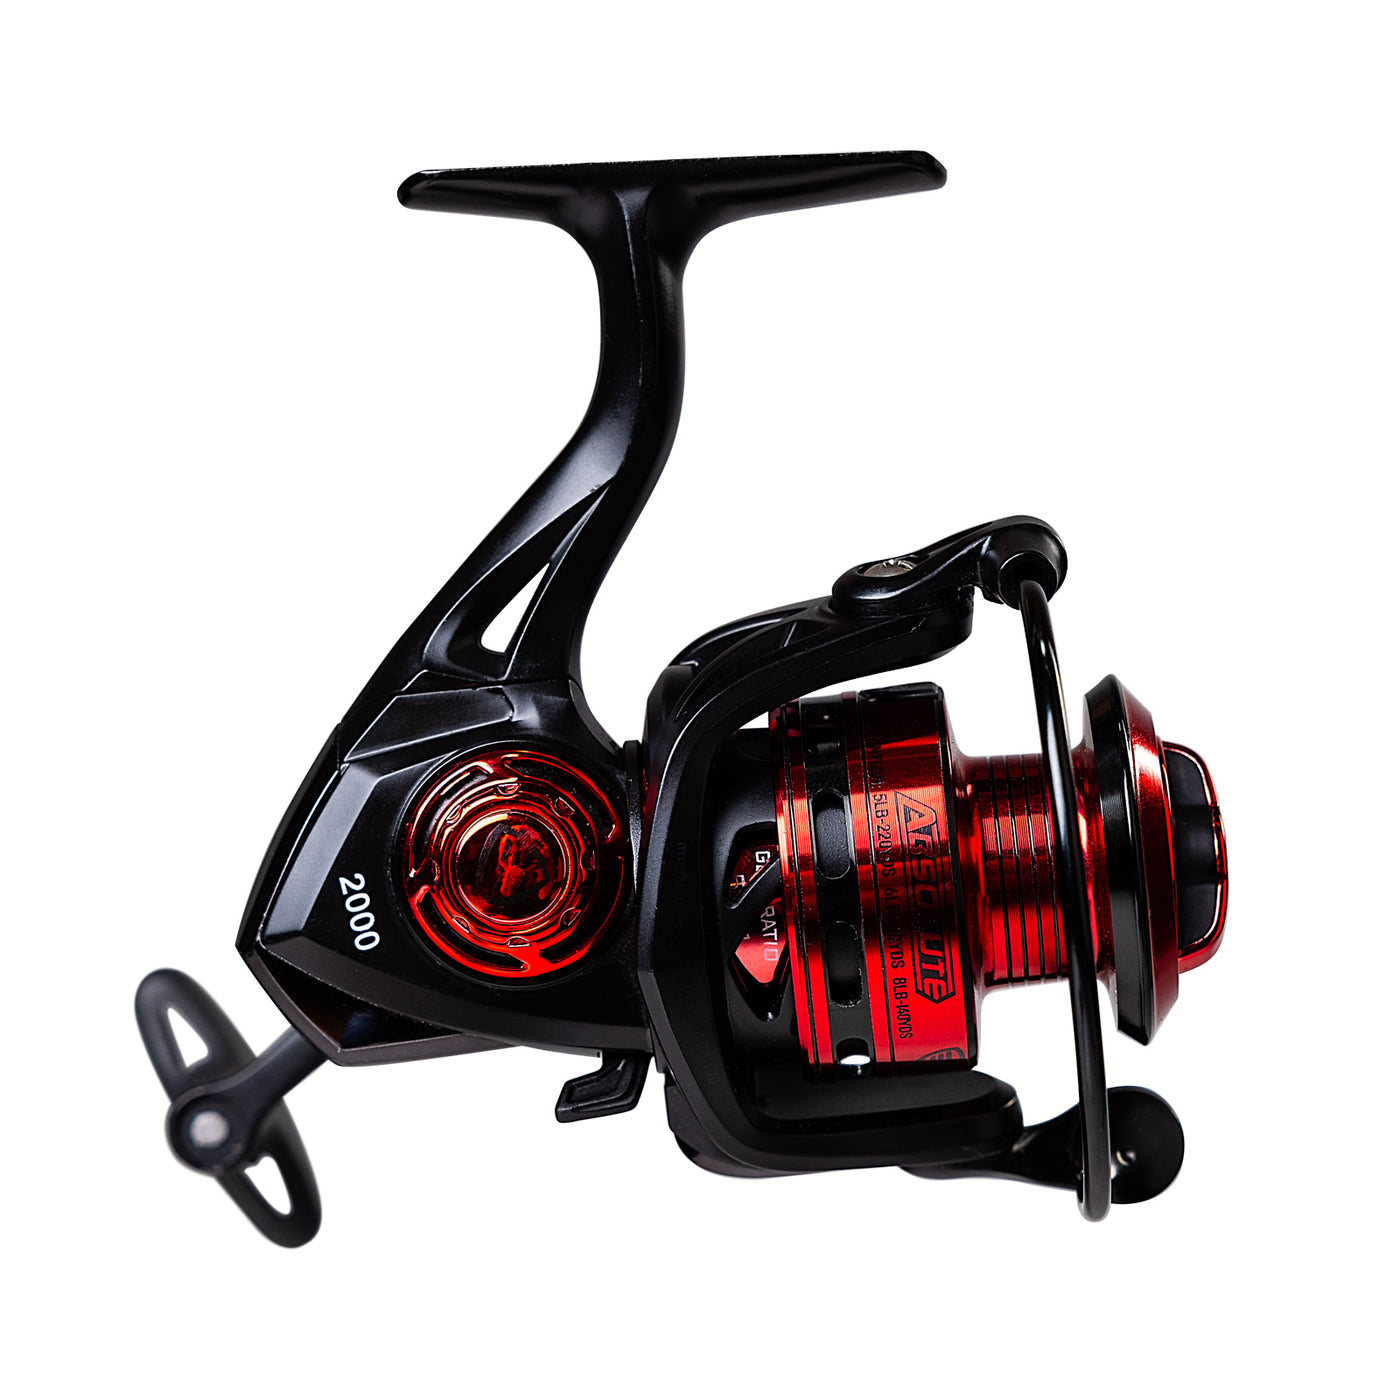 FISHING Dual Handle Spinning Reel, 5.2 1 Gear Ratio, 7+1 Bearing Effortless  Fishing Experience for Left and Right Hand Anglers